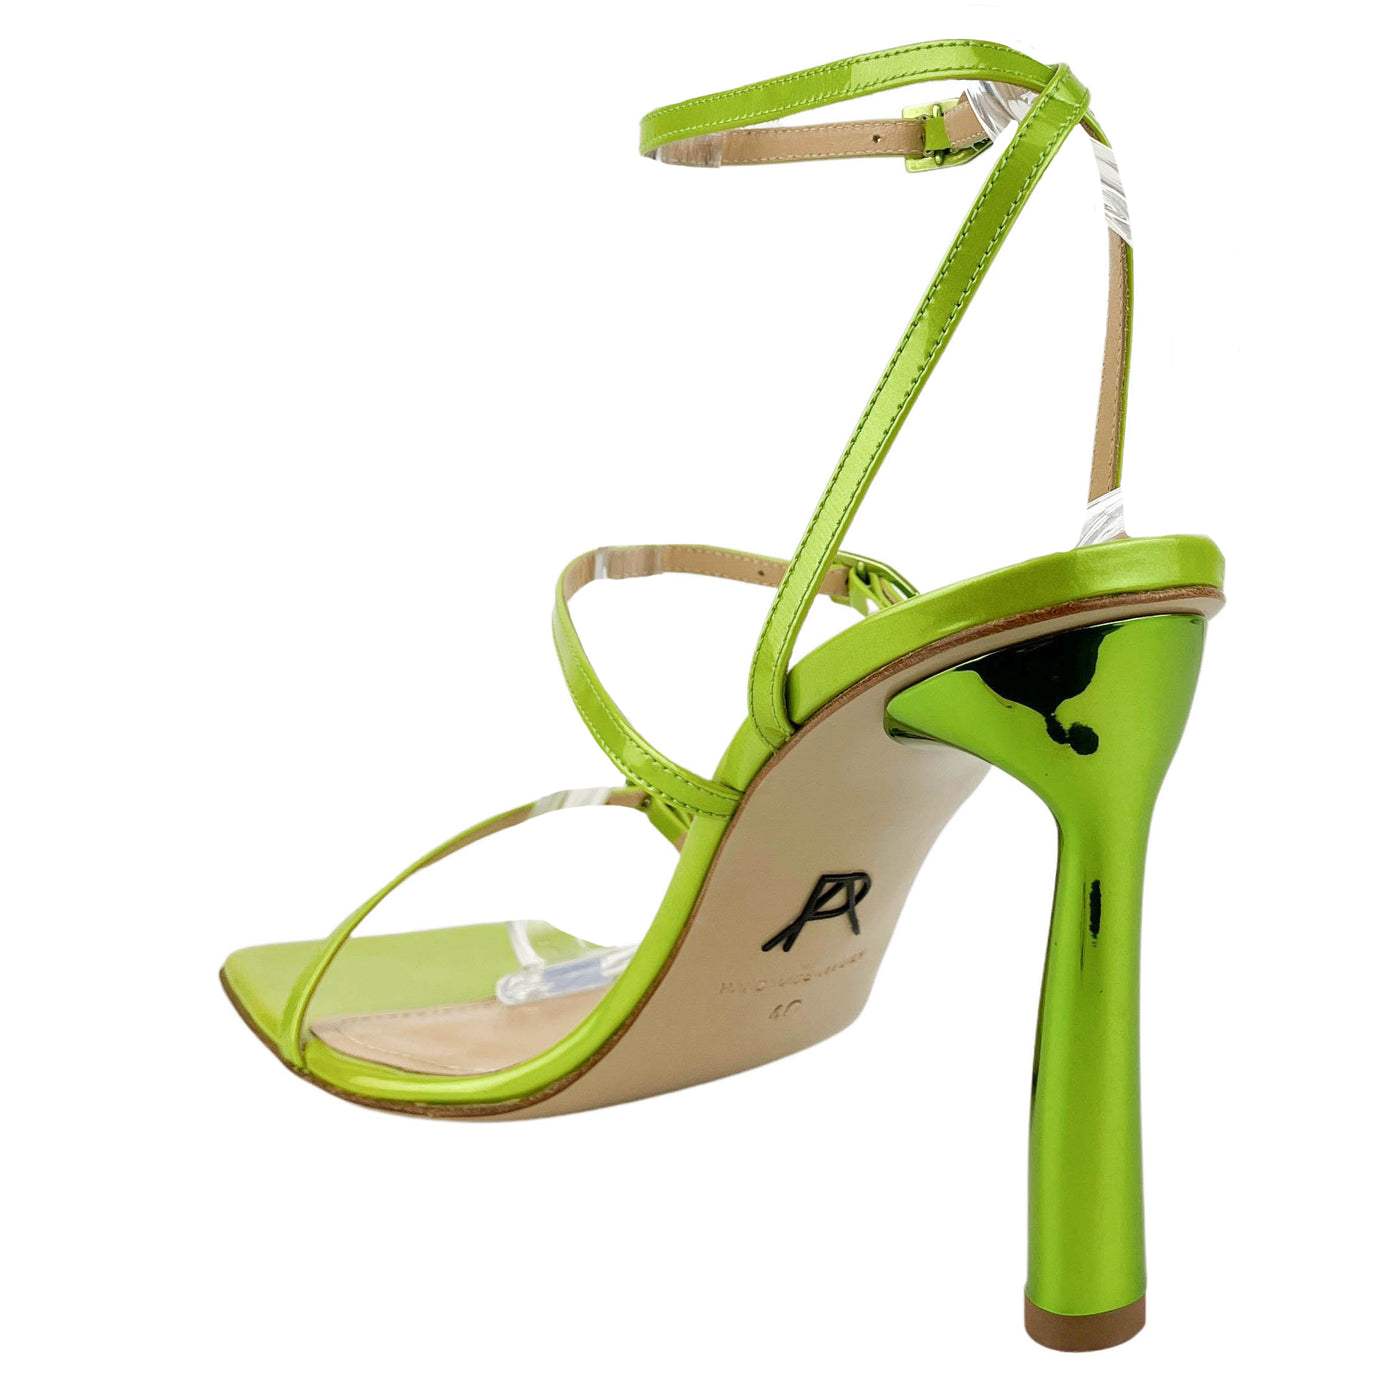 Paul Andrew Slinky Sandals in Acid Yellow - Discounts on Paul Andrew at UAL